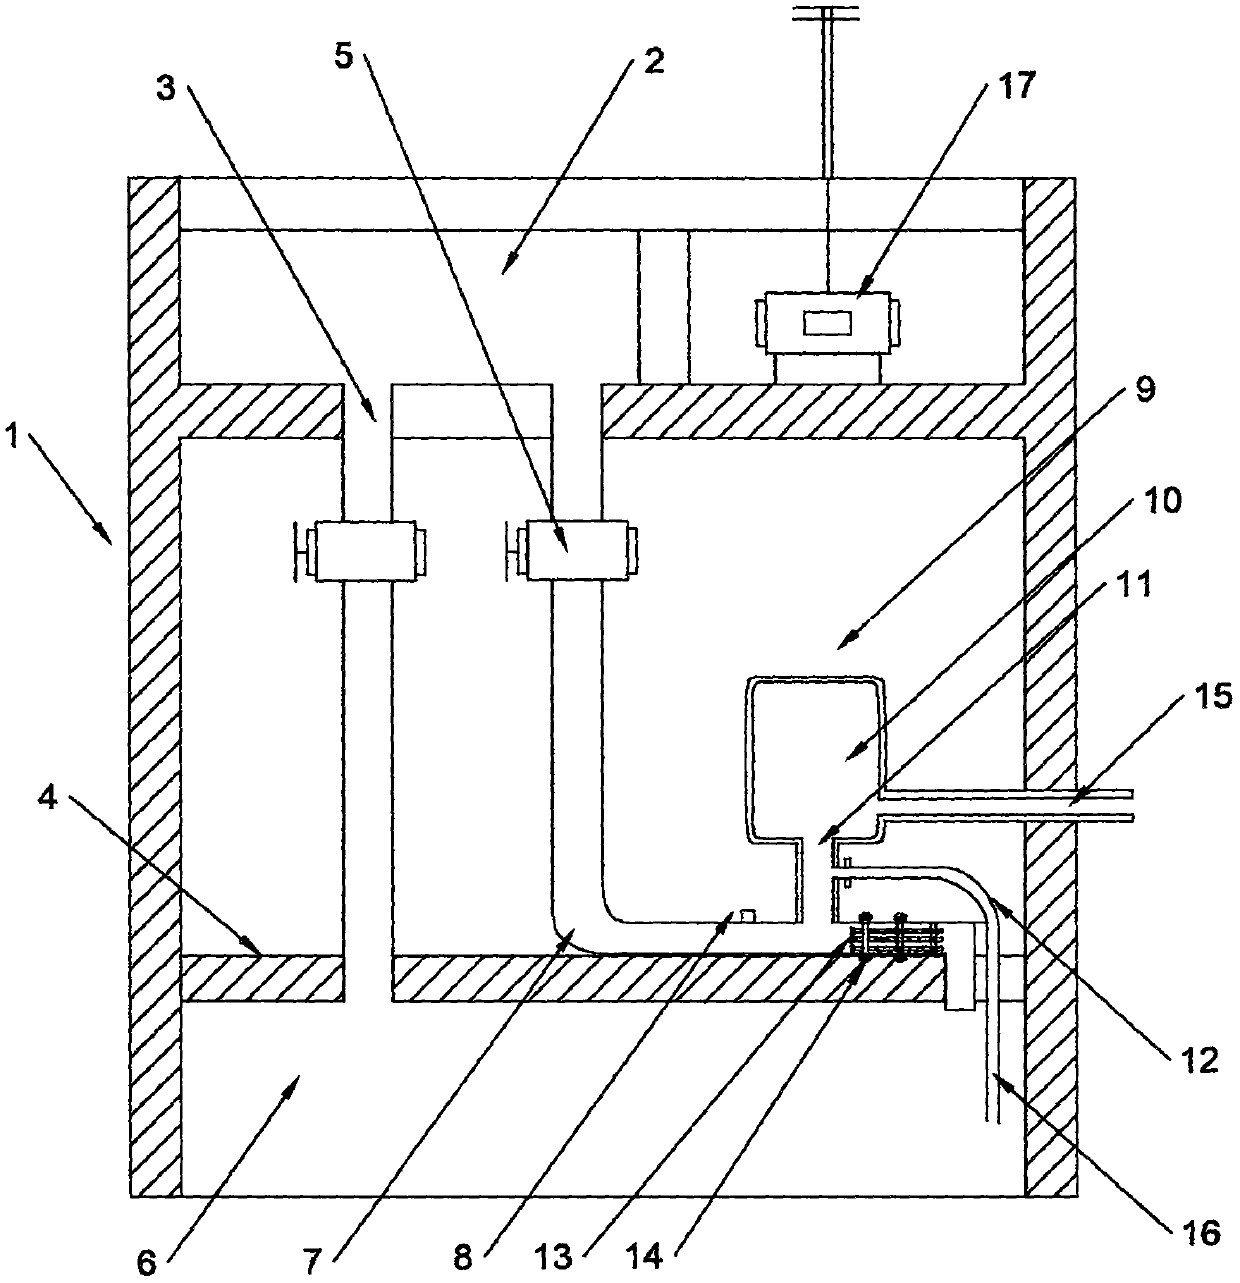 Static water rising circulating power generating system based on injection pump